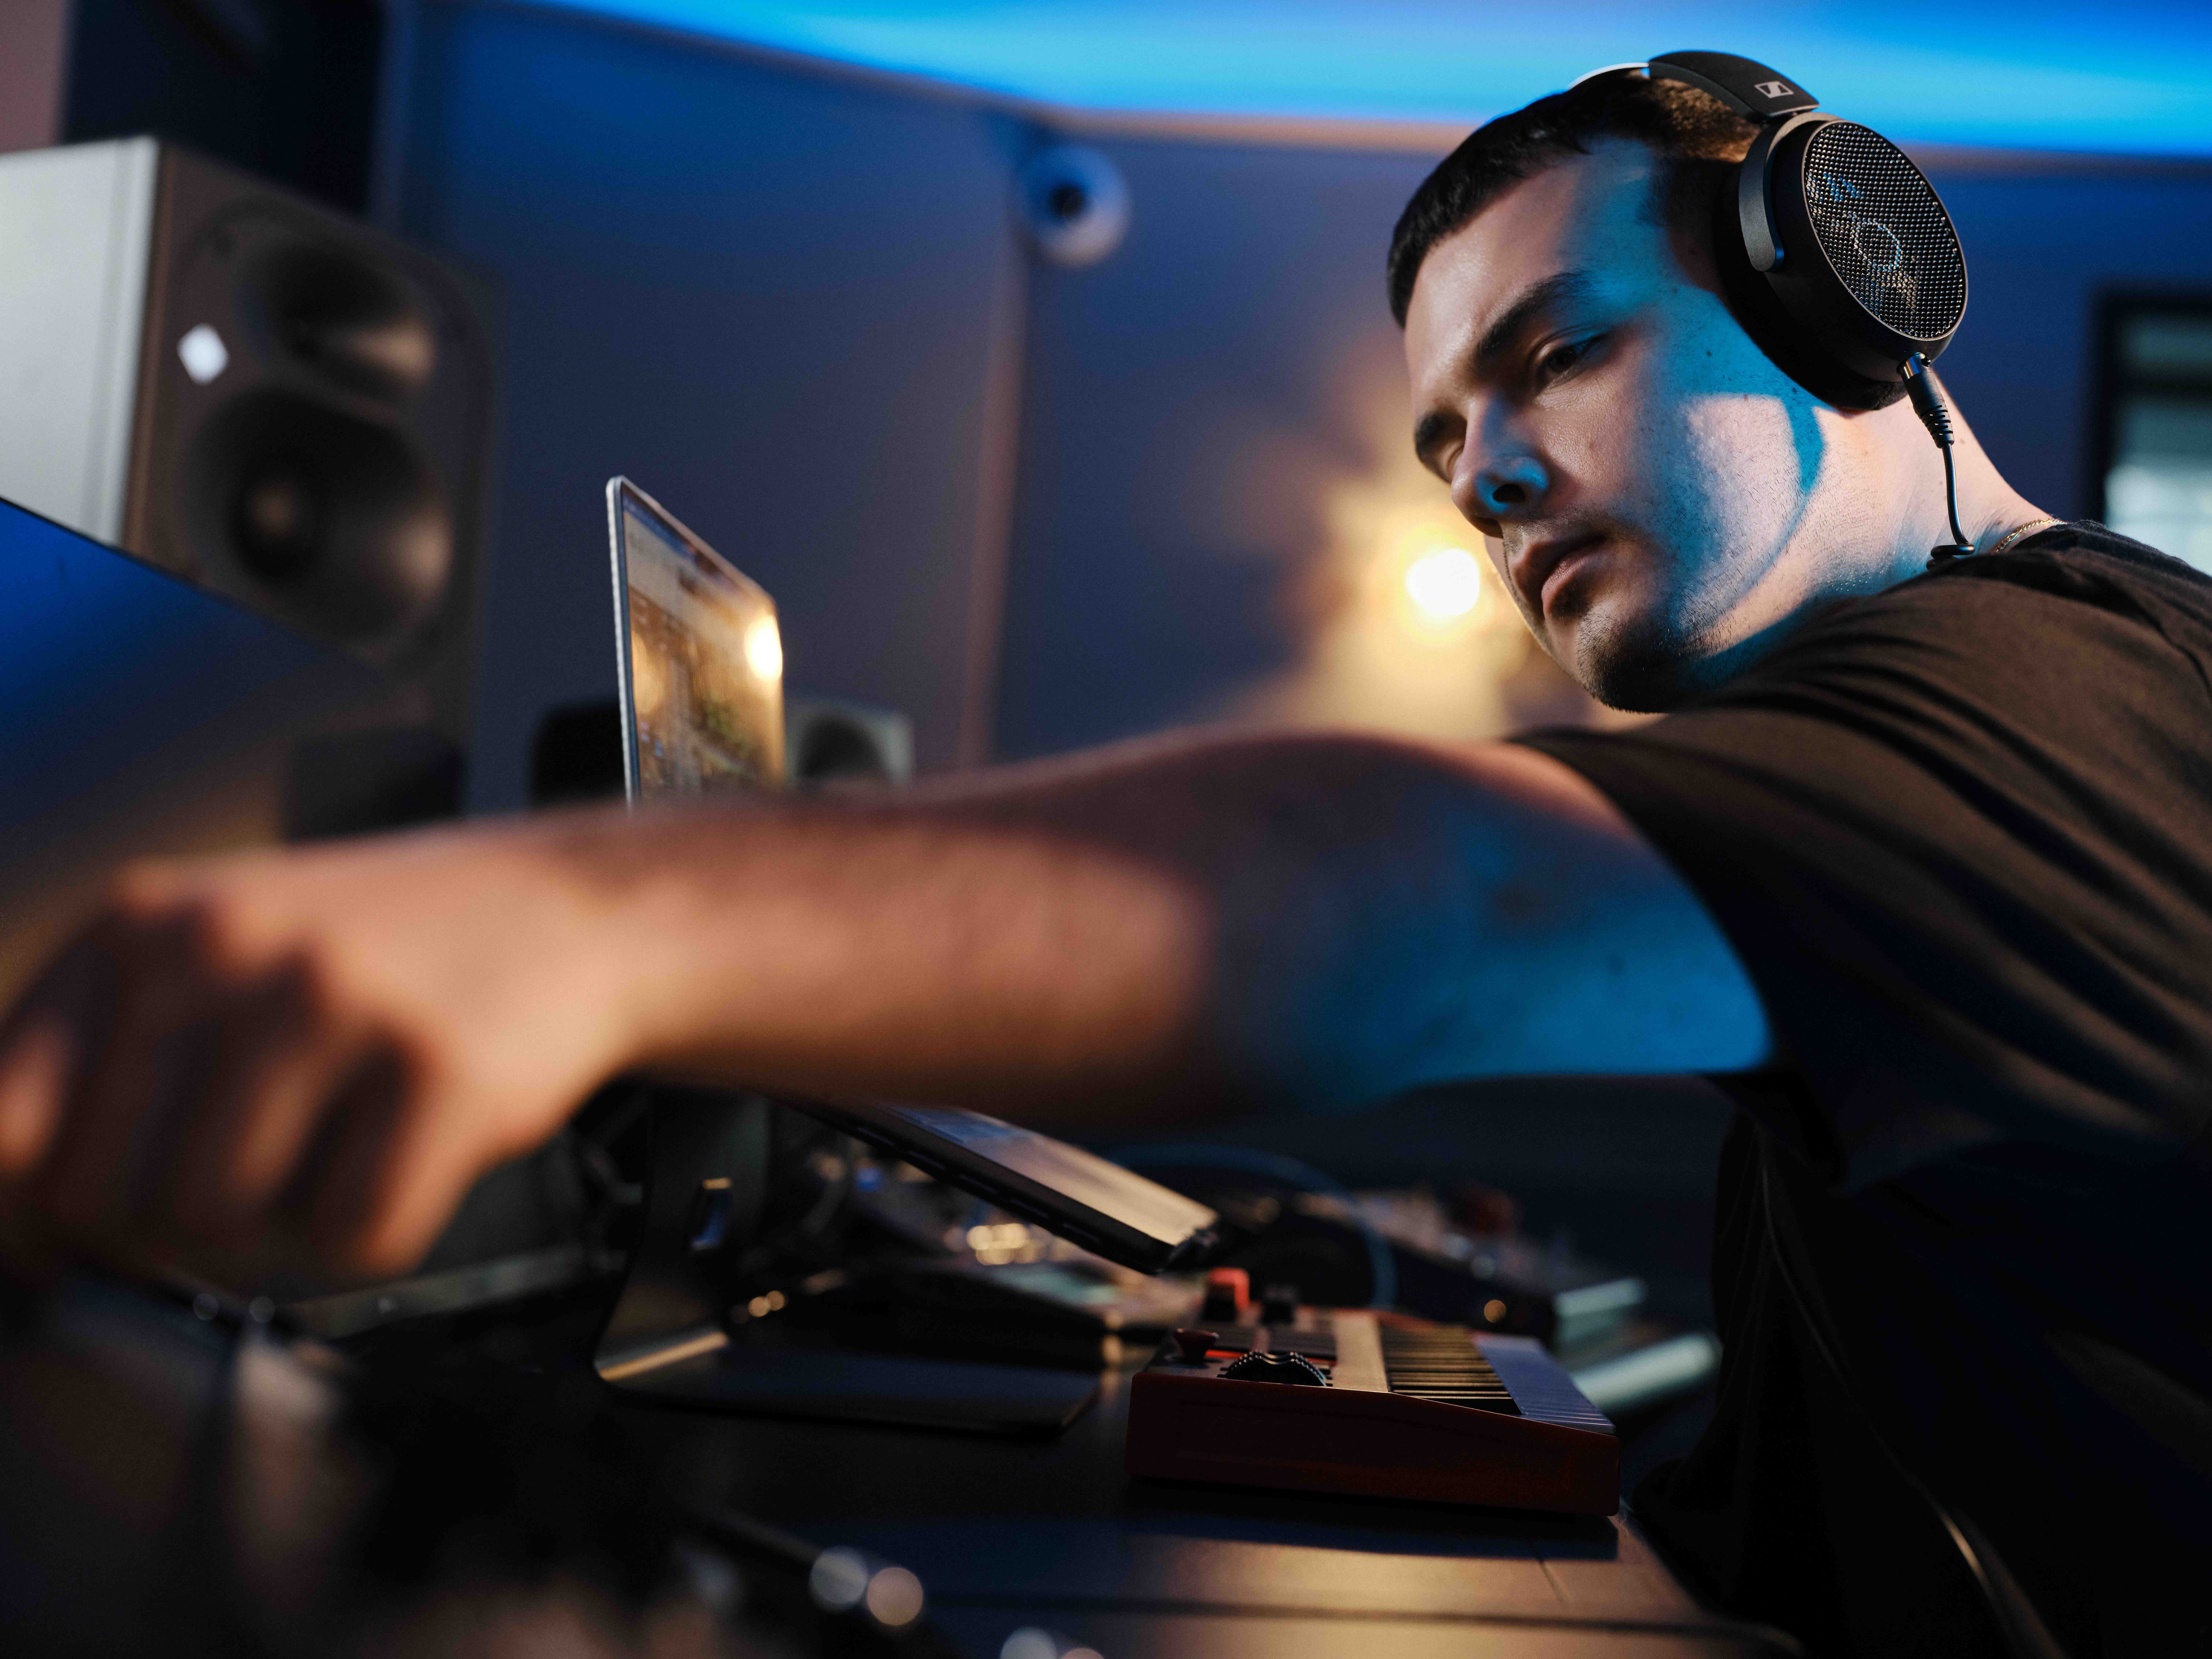 The Sennheiser HD 490 PRO studio headphones put users in full control of every detail of the mix